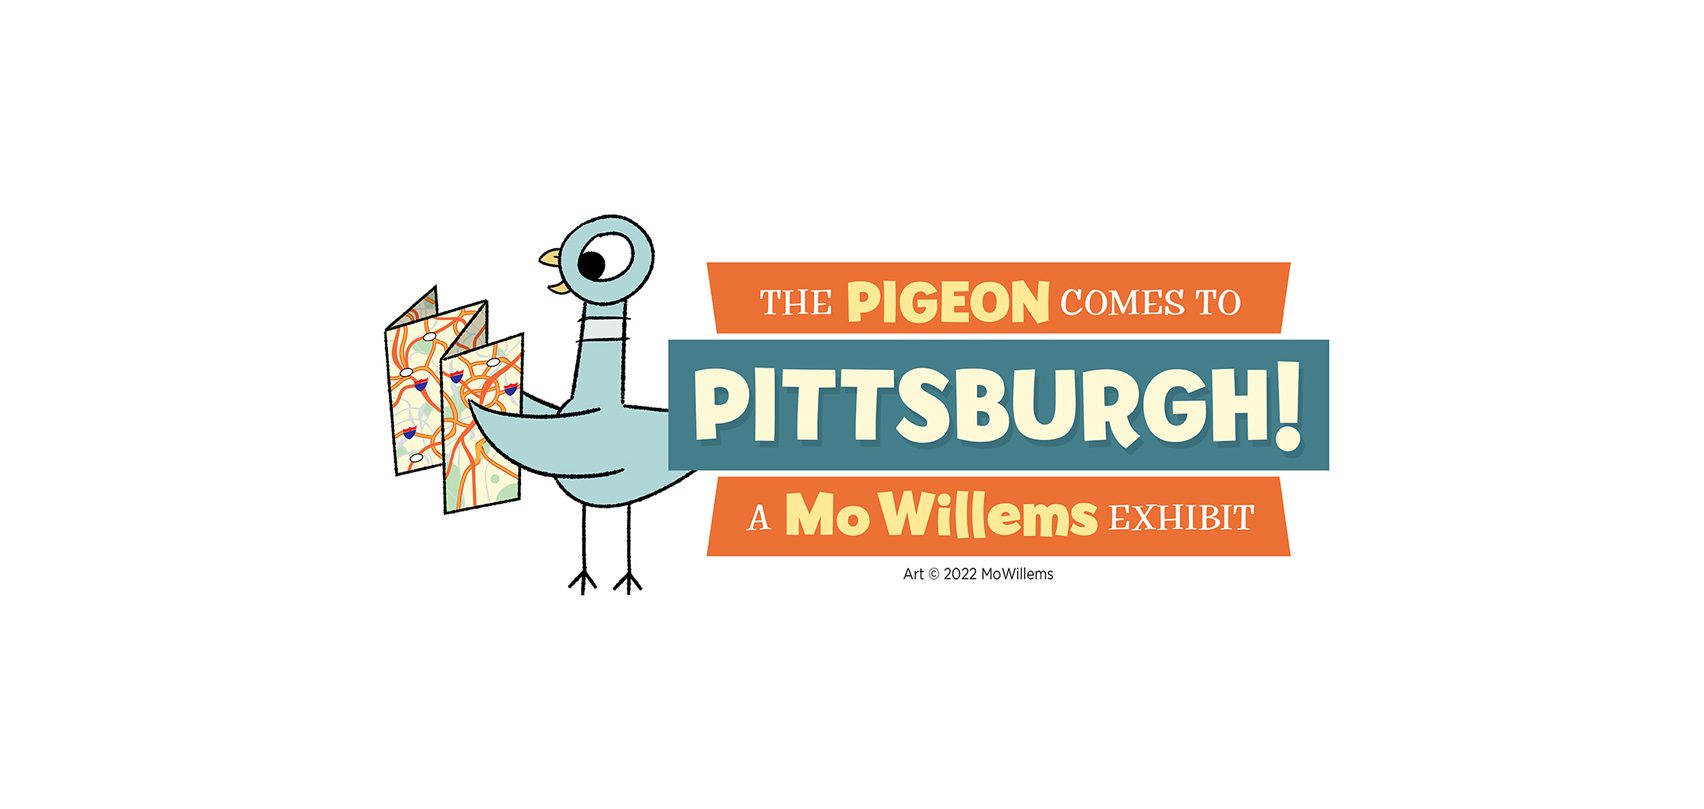 The Pigeon Comes to Pittsburgh! A Mo Willems Exhibit